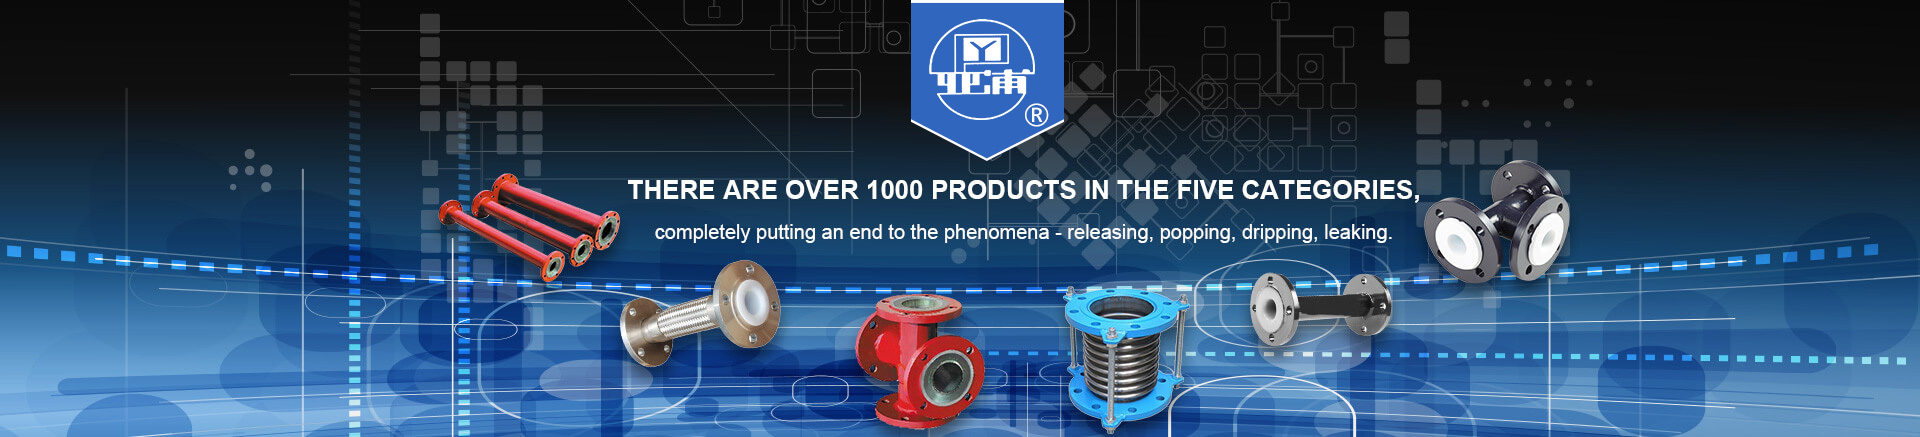 There are over 1000 products in the five categories.